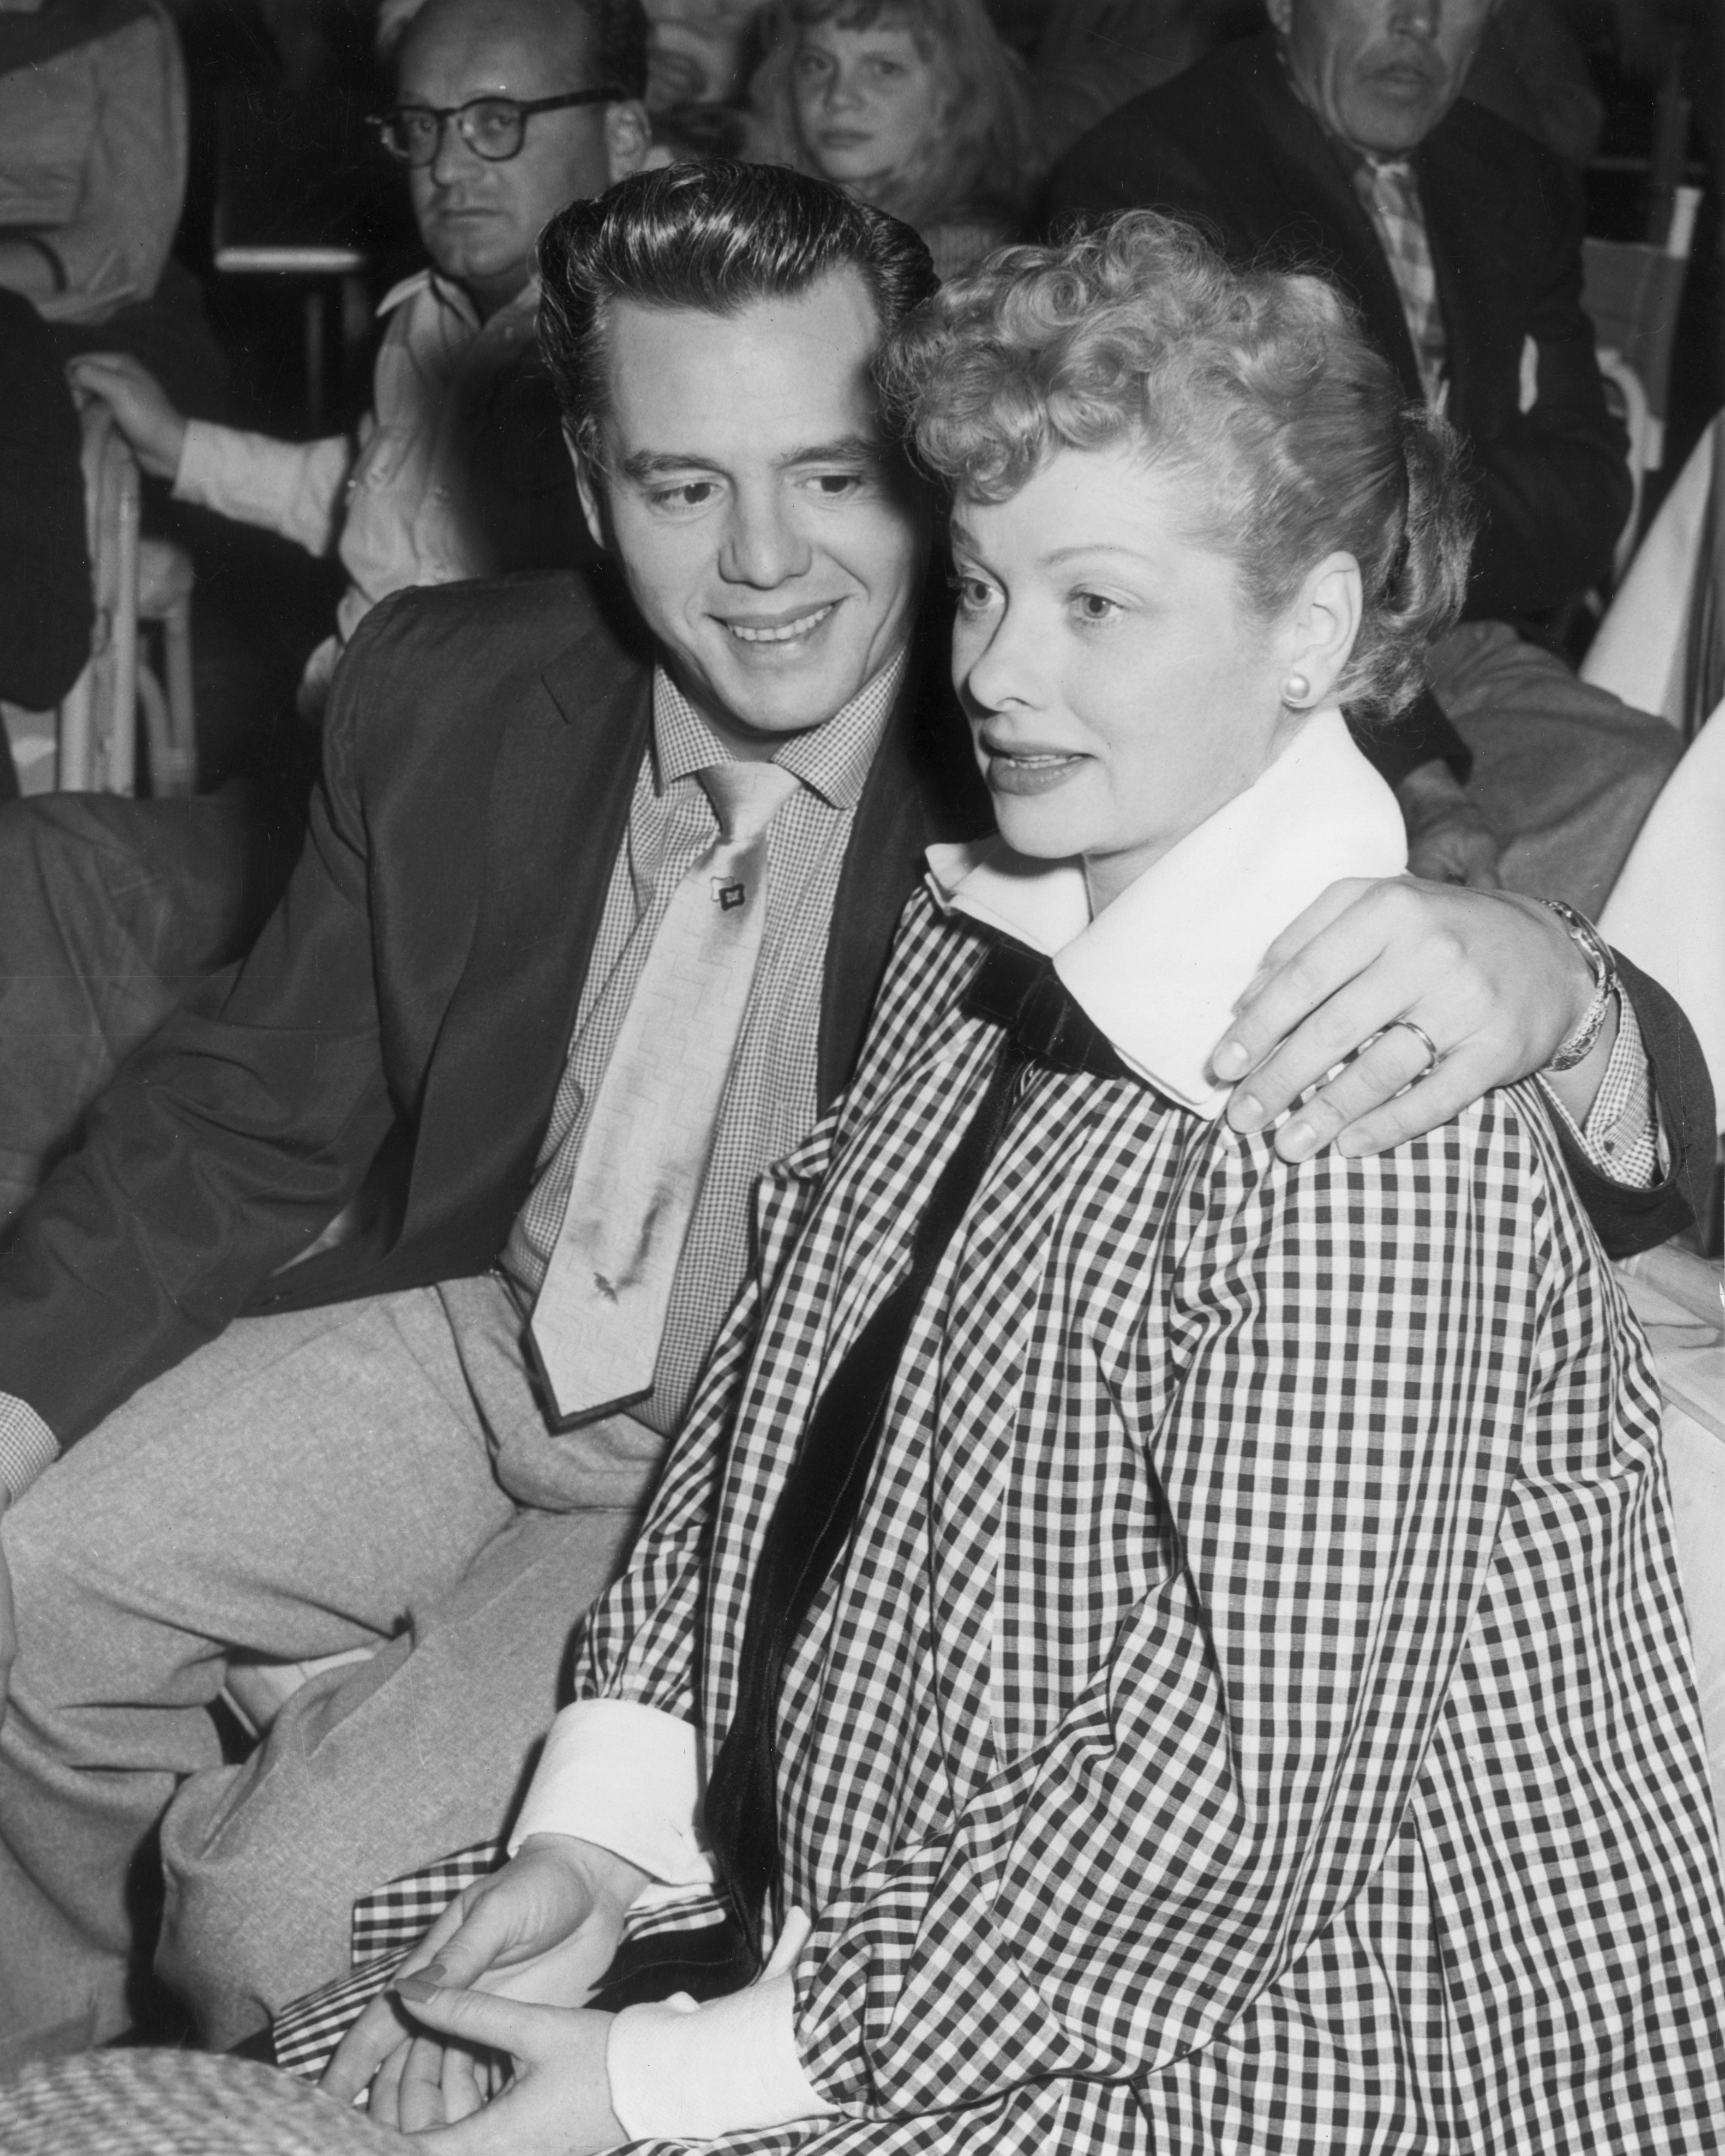 Desi Arnaz embraces his wife, Lucille Ball while watching a televised football game at the Racquet Club in Palm Springs, California, circa 1953 | Source : Getty Images